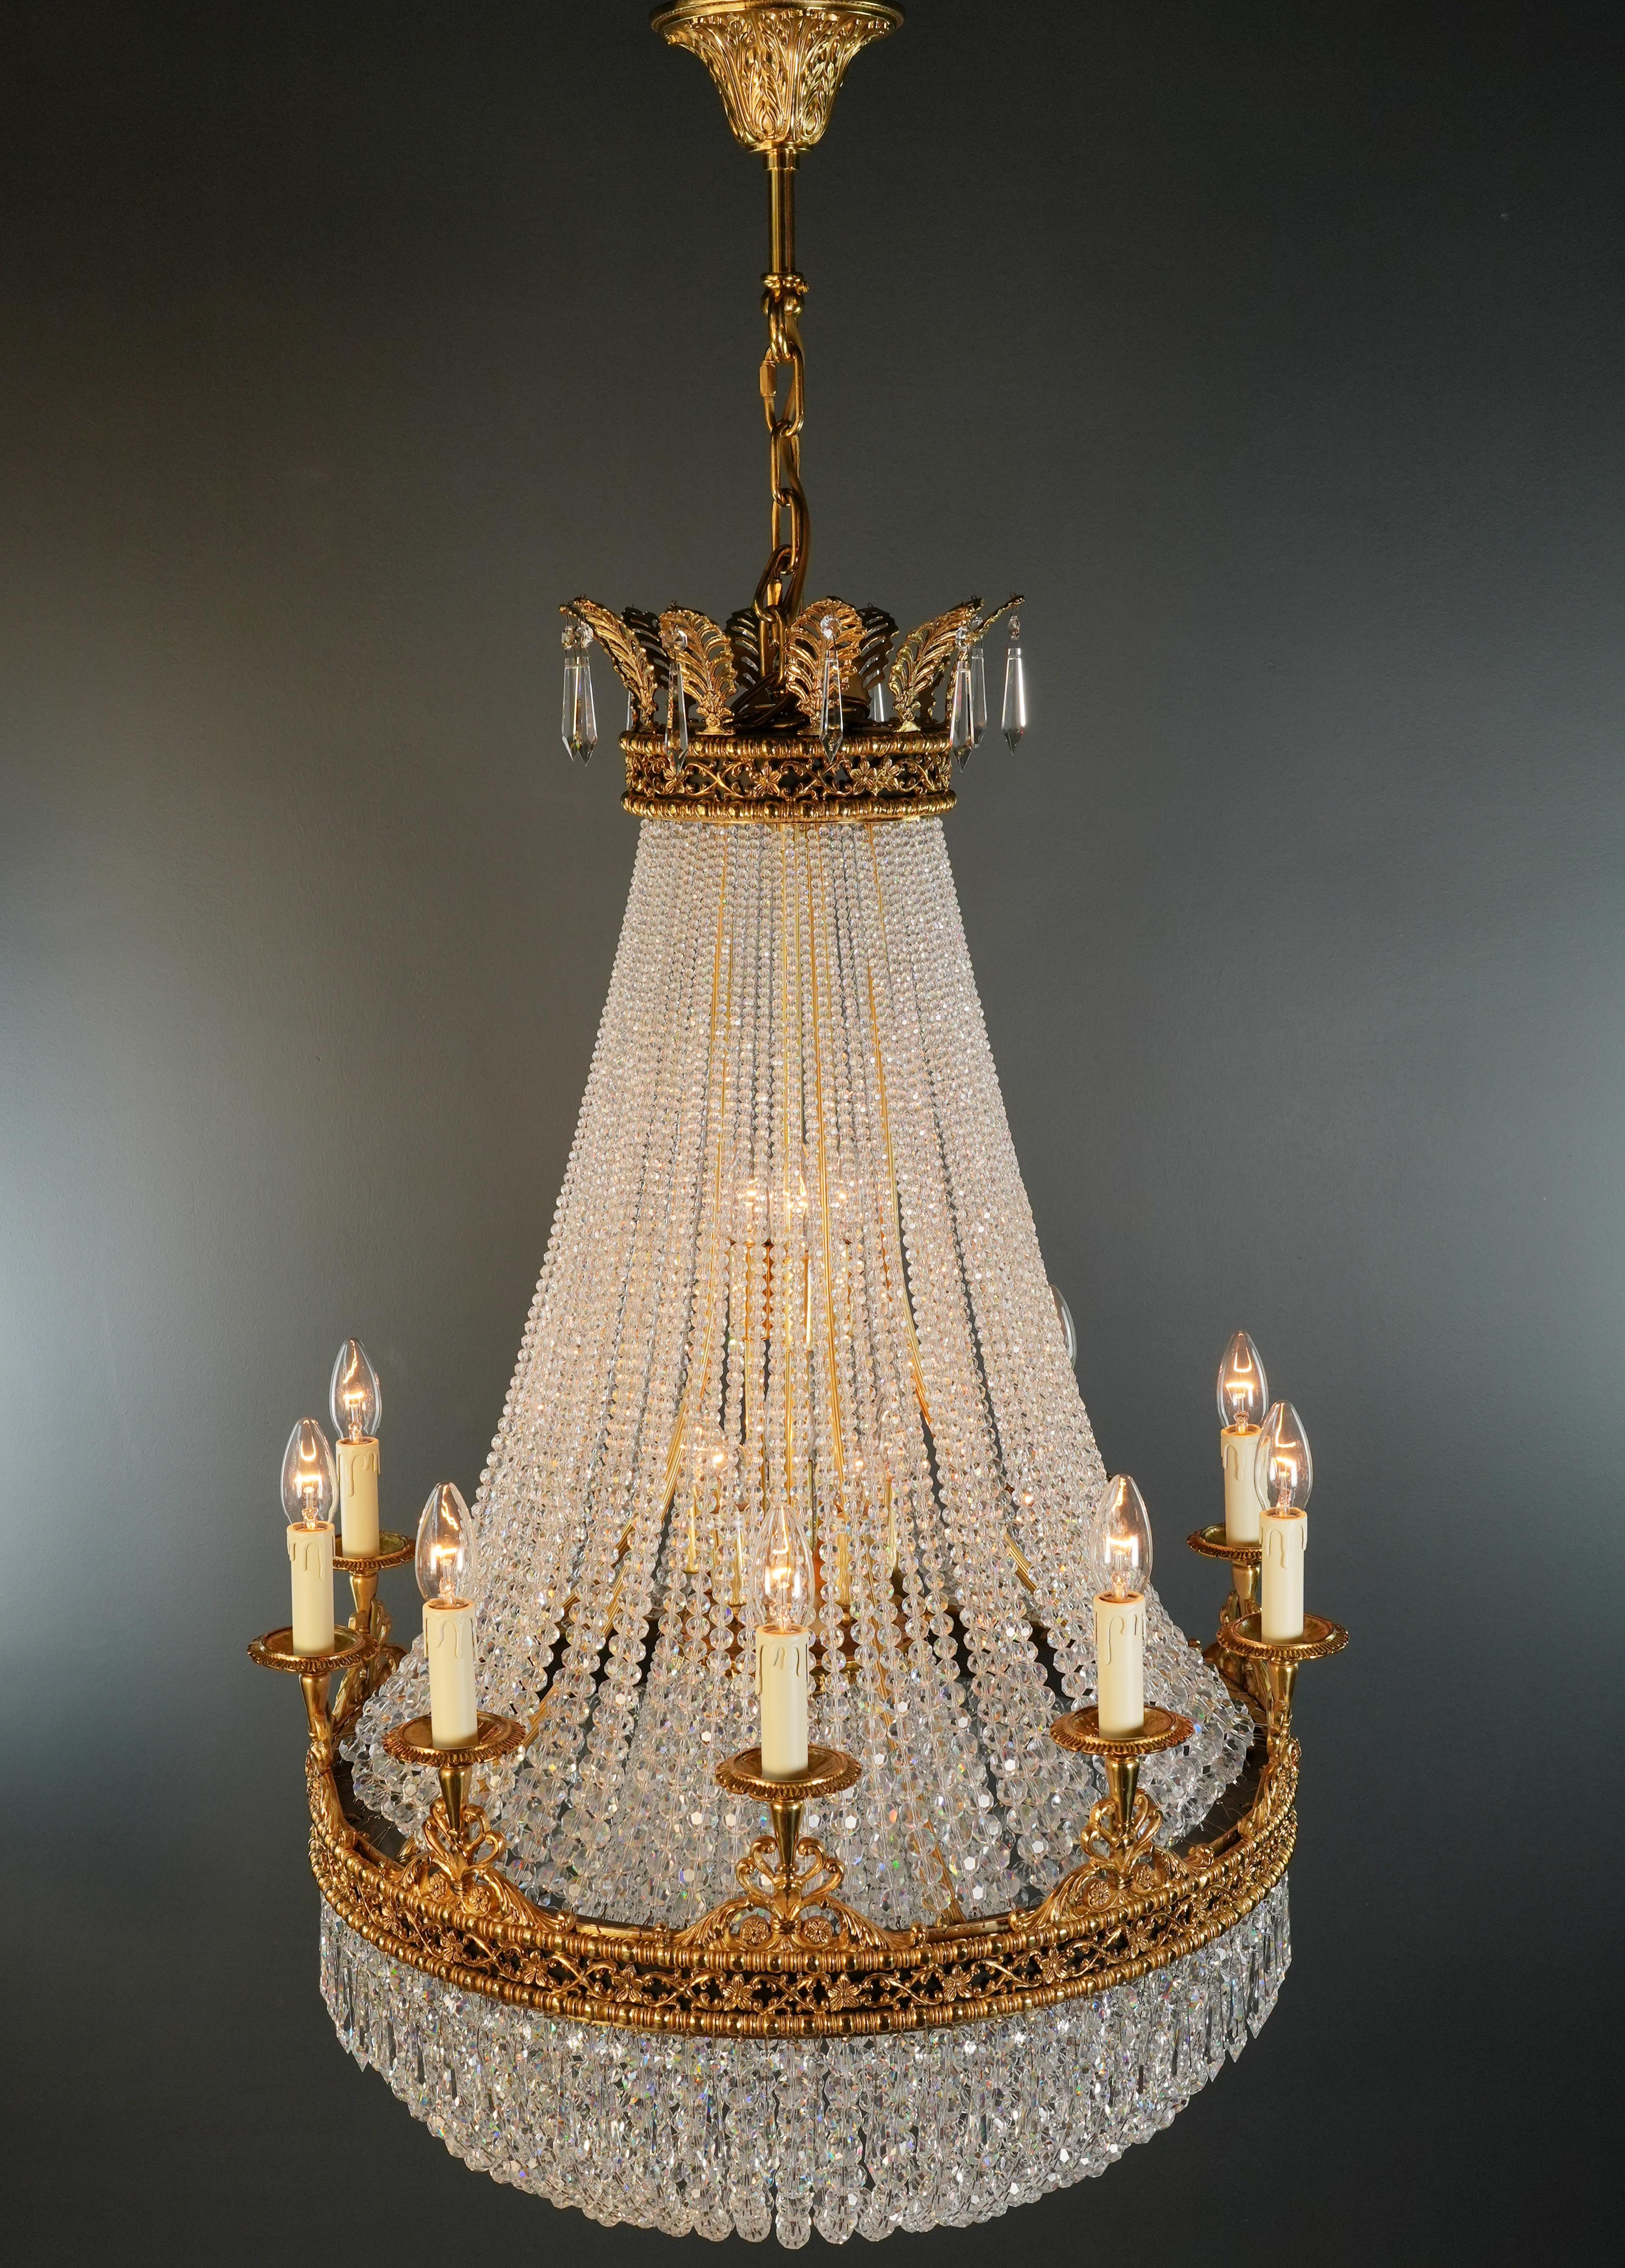 Brass Basket Empire Sac a Pearl Chandelier Beaded Crystal Lustre Lamp Antique For Sale 3